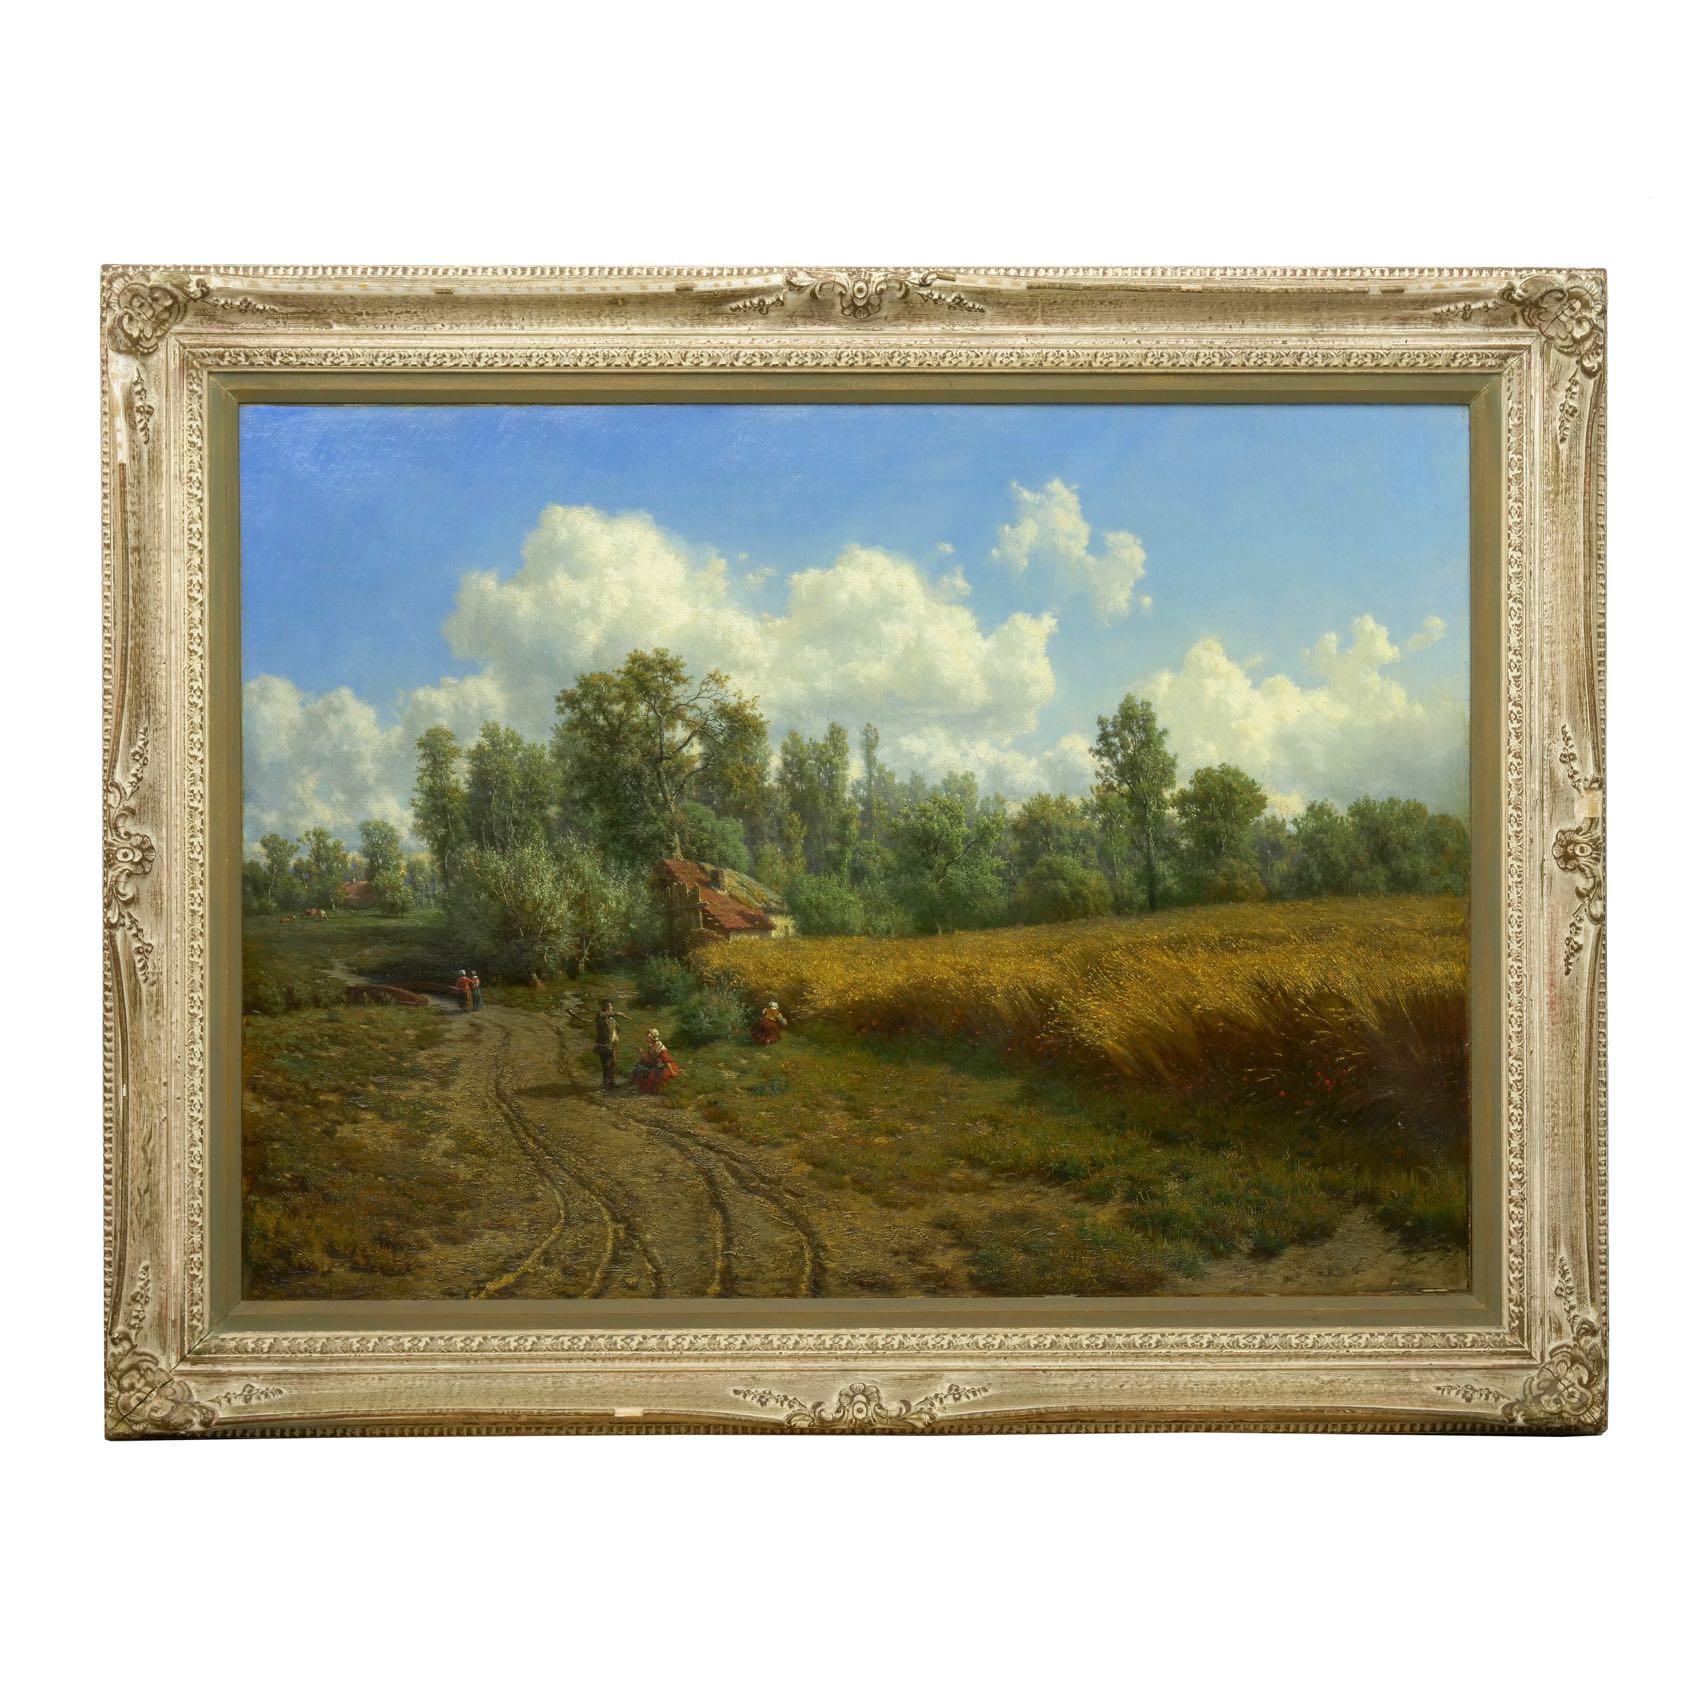 An incredibly powerful and exquisitely detailed work by Jean-Baptiste Kindermans, the landscape captures a moment of rural life in 19th century Belgium. 

A well worn dirt path with competing grooves of carriage tracks meanders past a field of